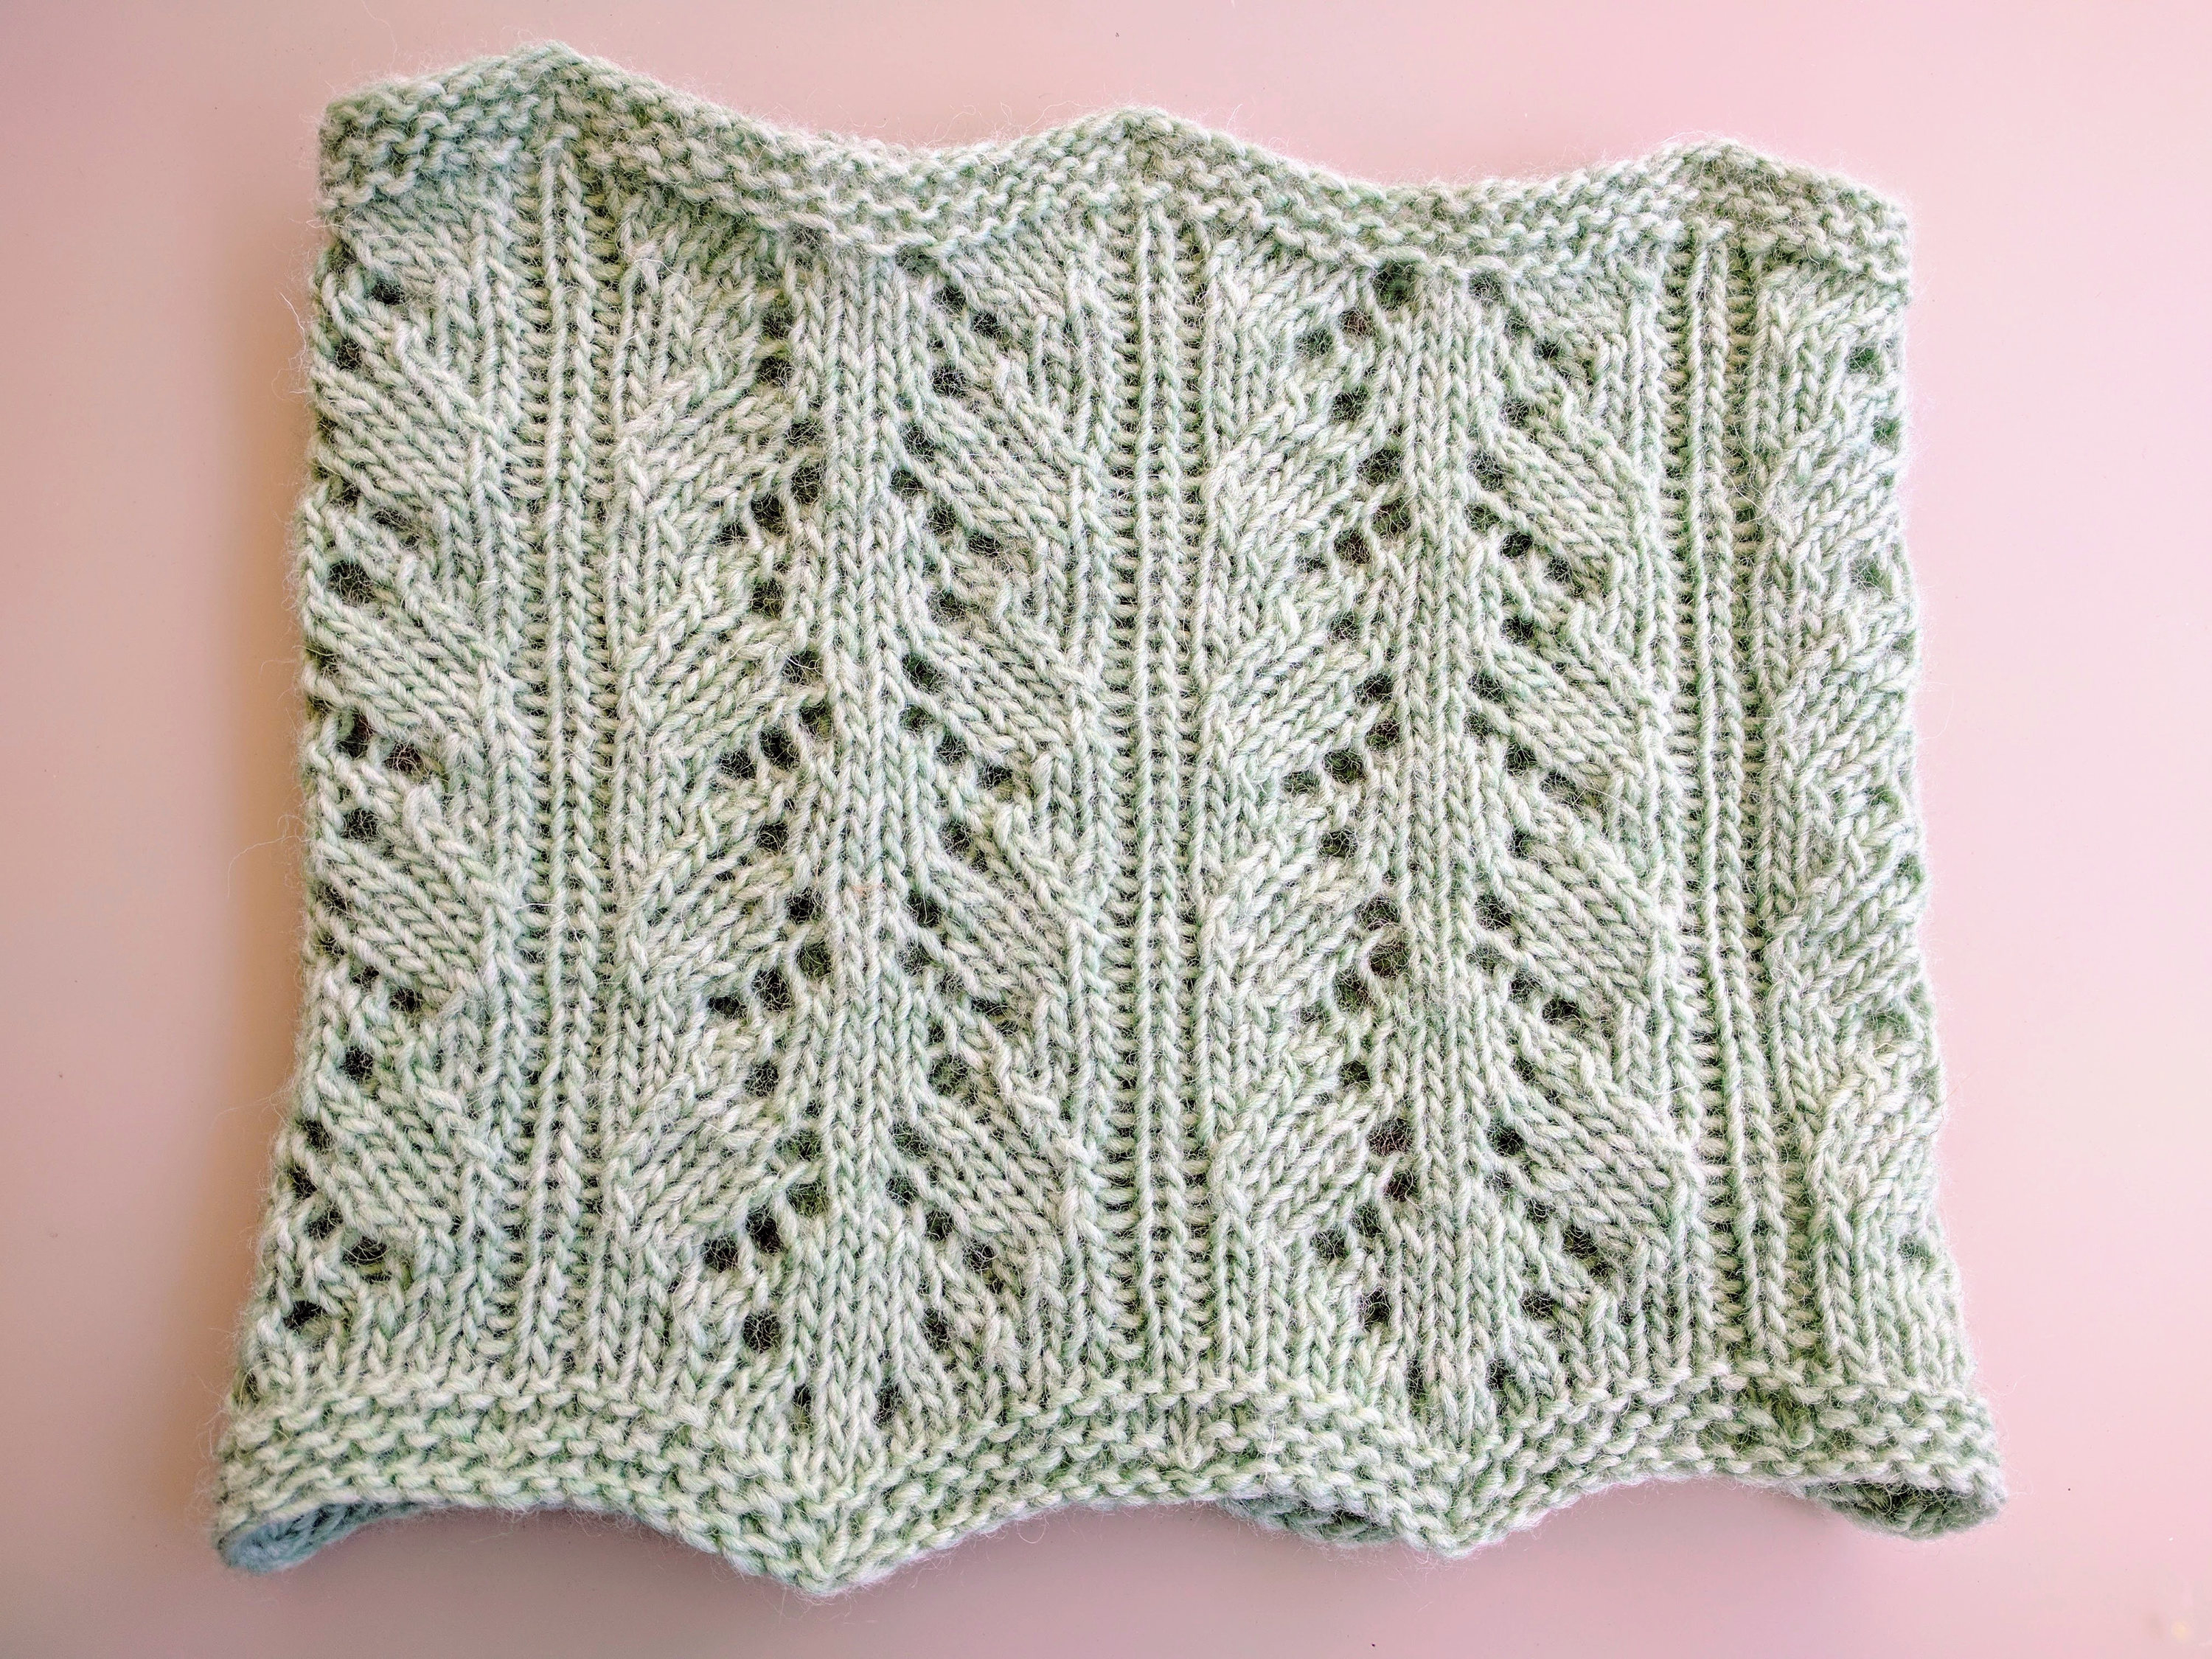 Knitted Lace Pattern Knitted Lace Cowl Pattern Download Easy To Knit First Knitted Lace Project